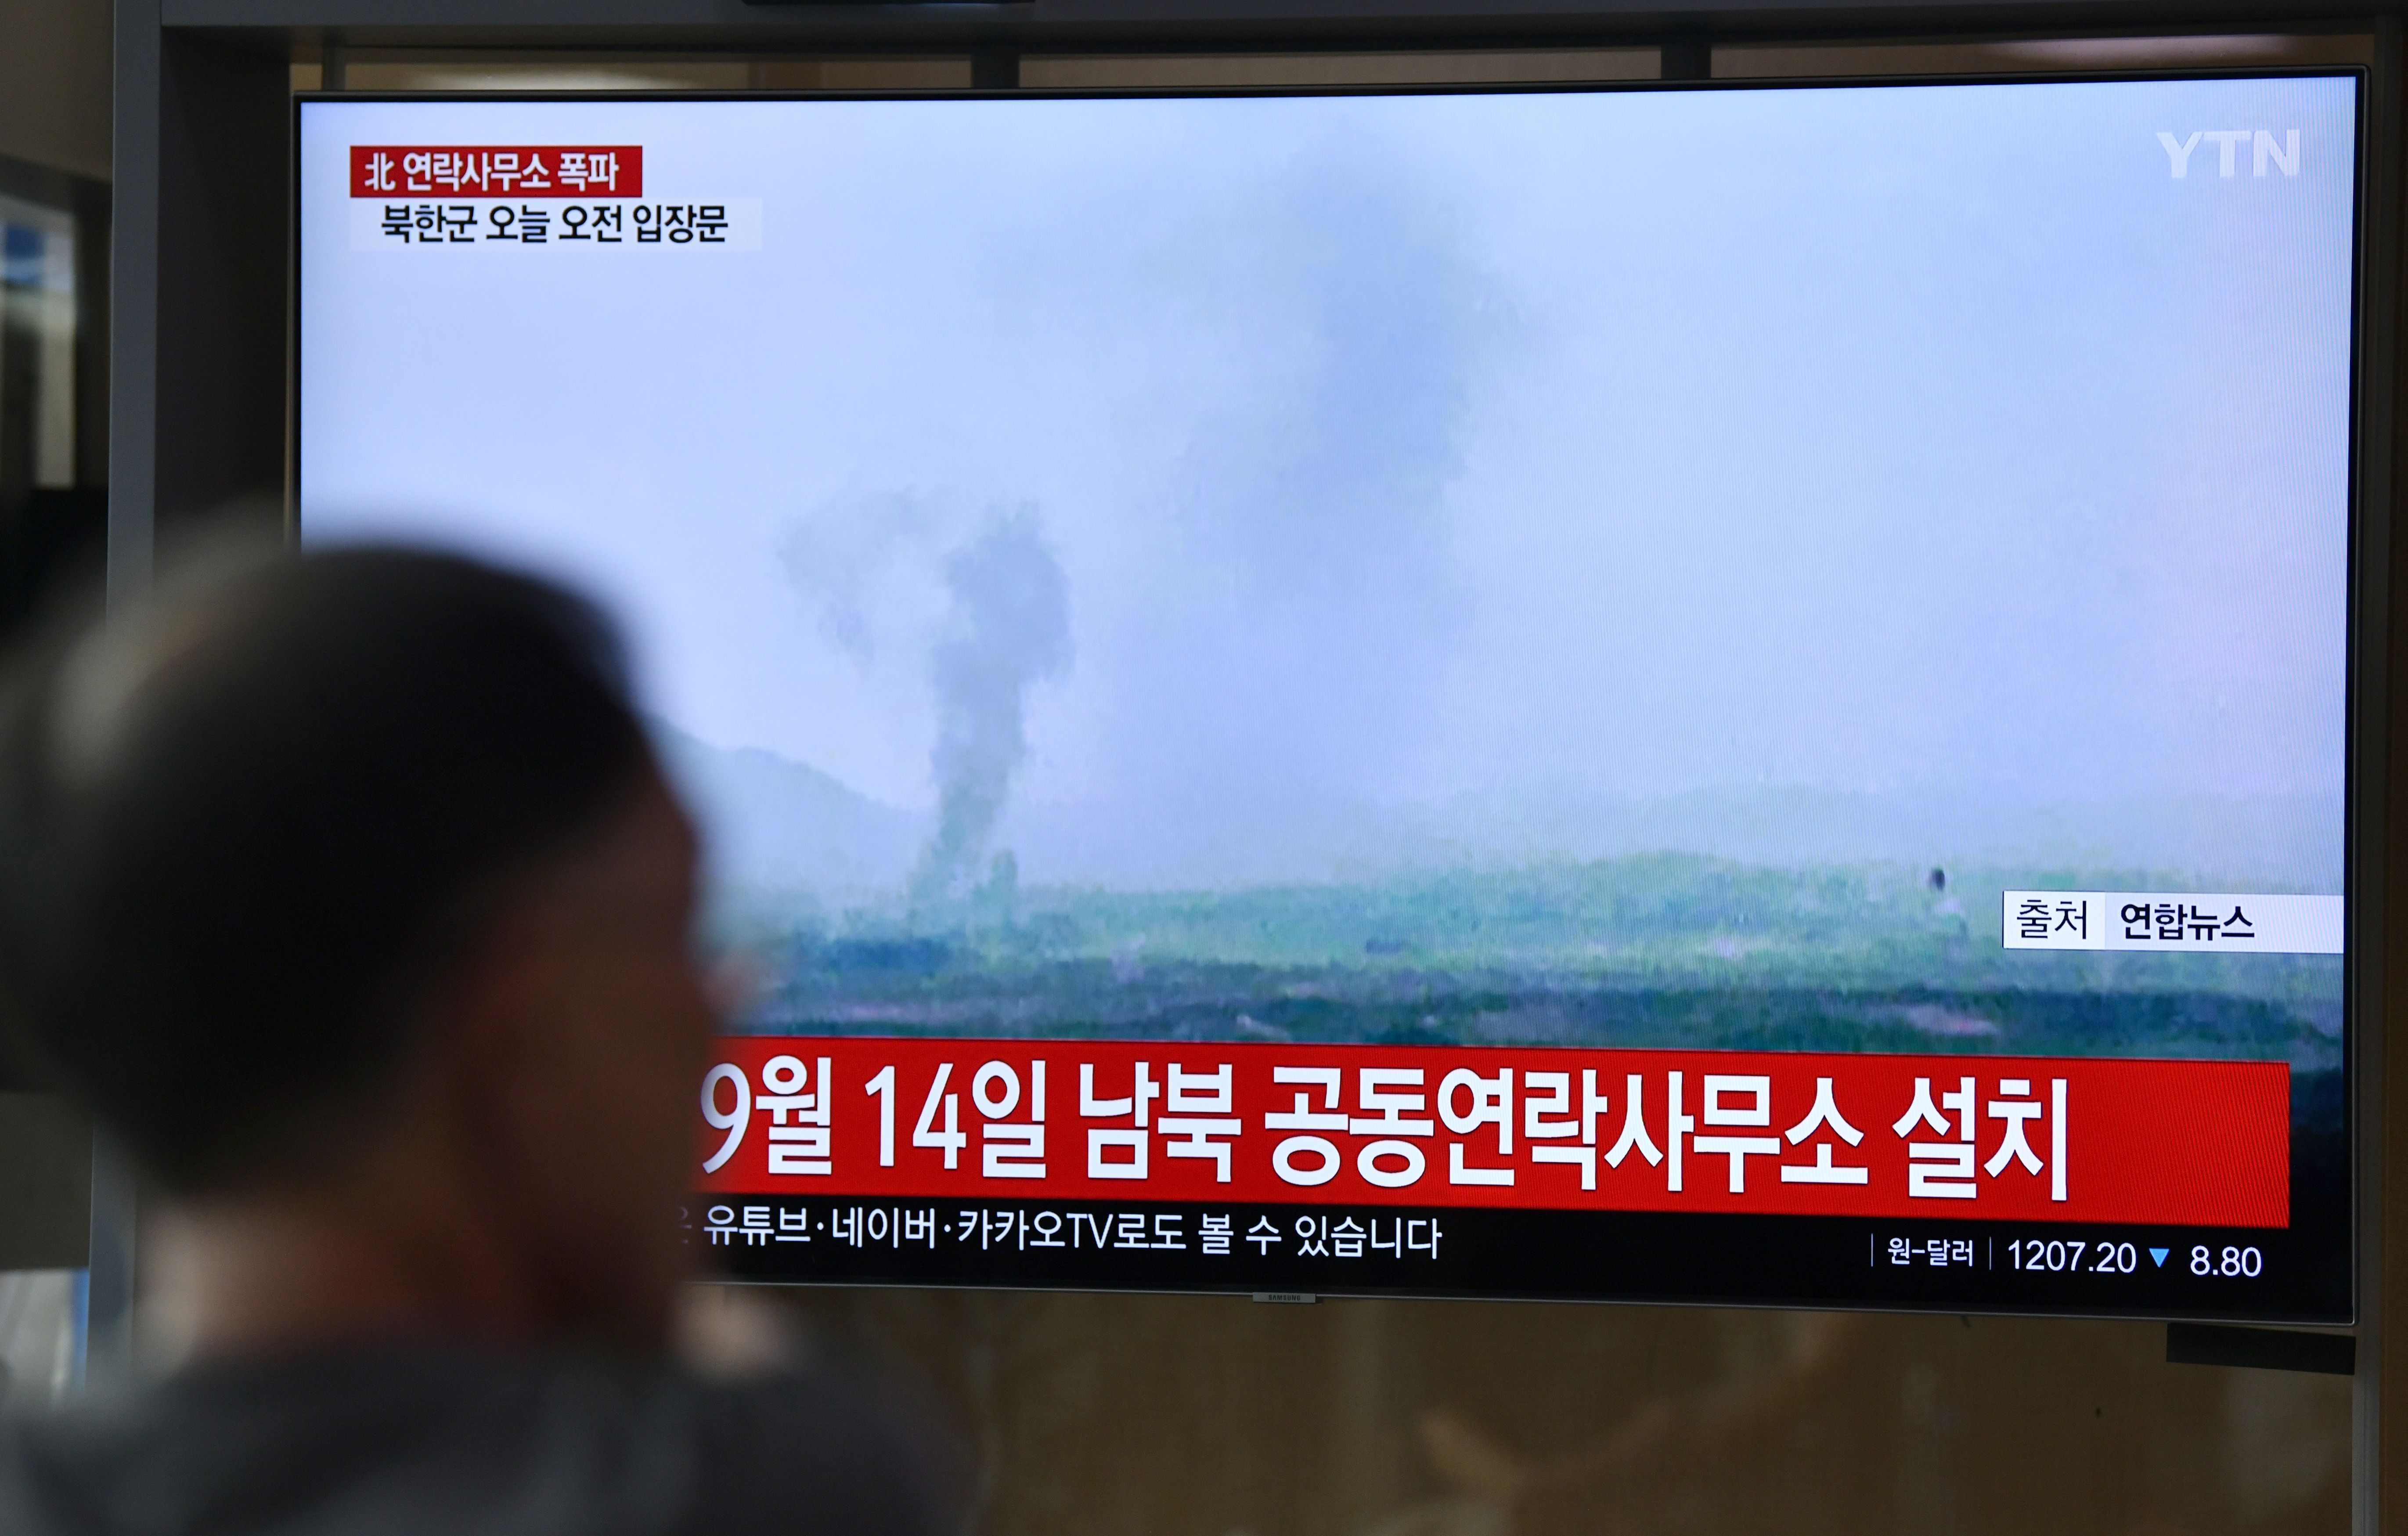 People watch a television news screen showing an explosion of an inter-Korean liaison office in North Korea's Kaesong Industrial Complex, at a railway station in Seoul on June 16, 2020. (Photo by JUNG YEON-JE/AFP via Getty Images)